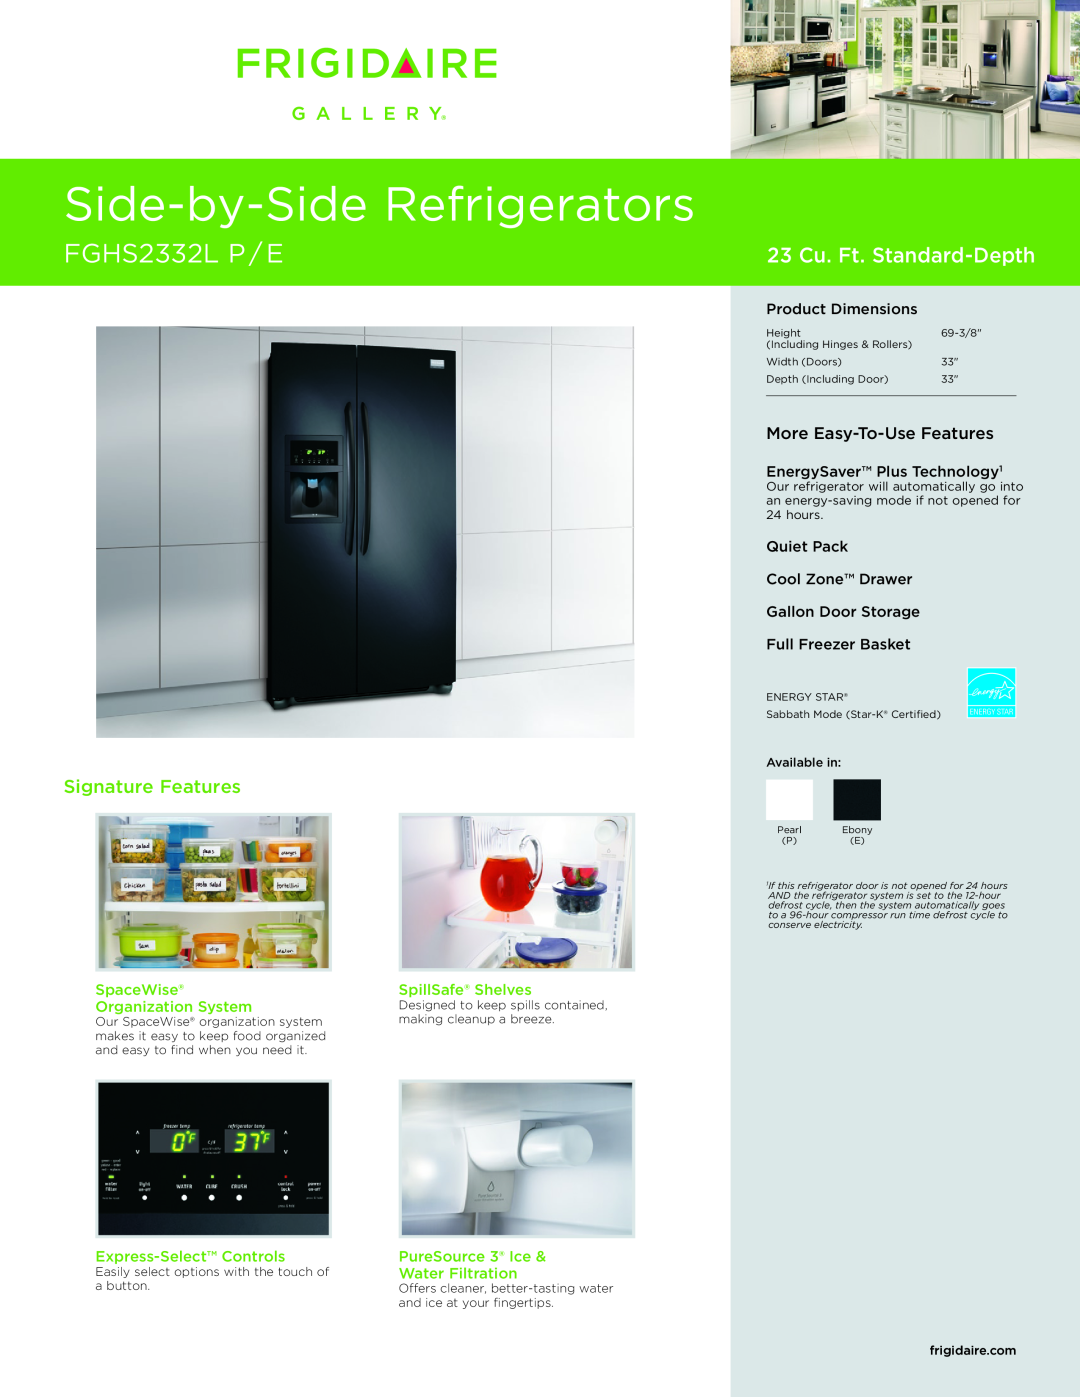 Frigidaire FGHS2332L P/E dimensions Side-by-SideRefrigerators, FGHS2332L P / E, 23 Cu. Ft. Standard-Depth, SpaceWise 